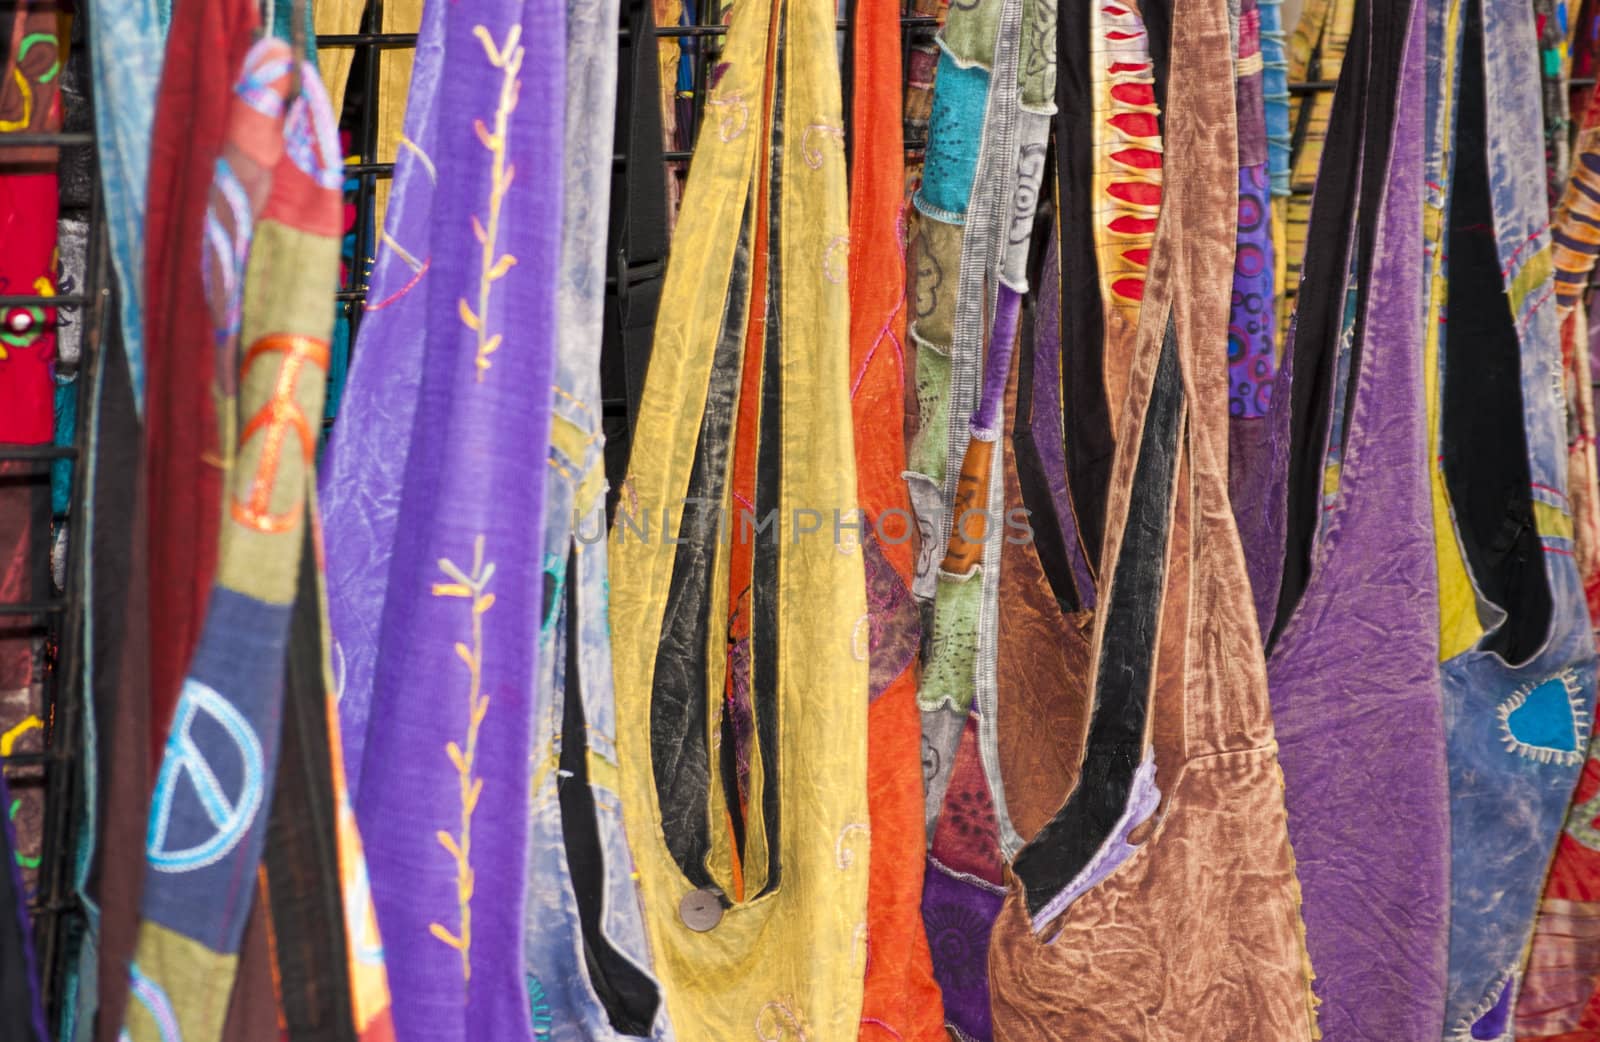 Display of multicolored purses at a public market